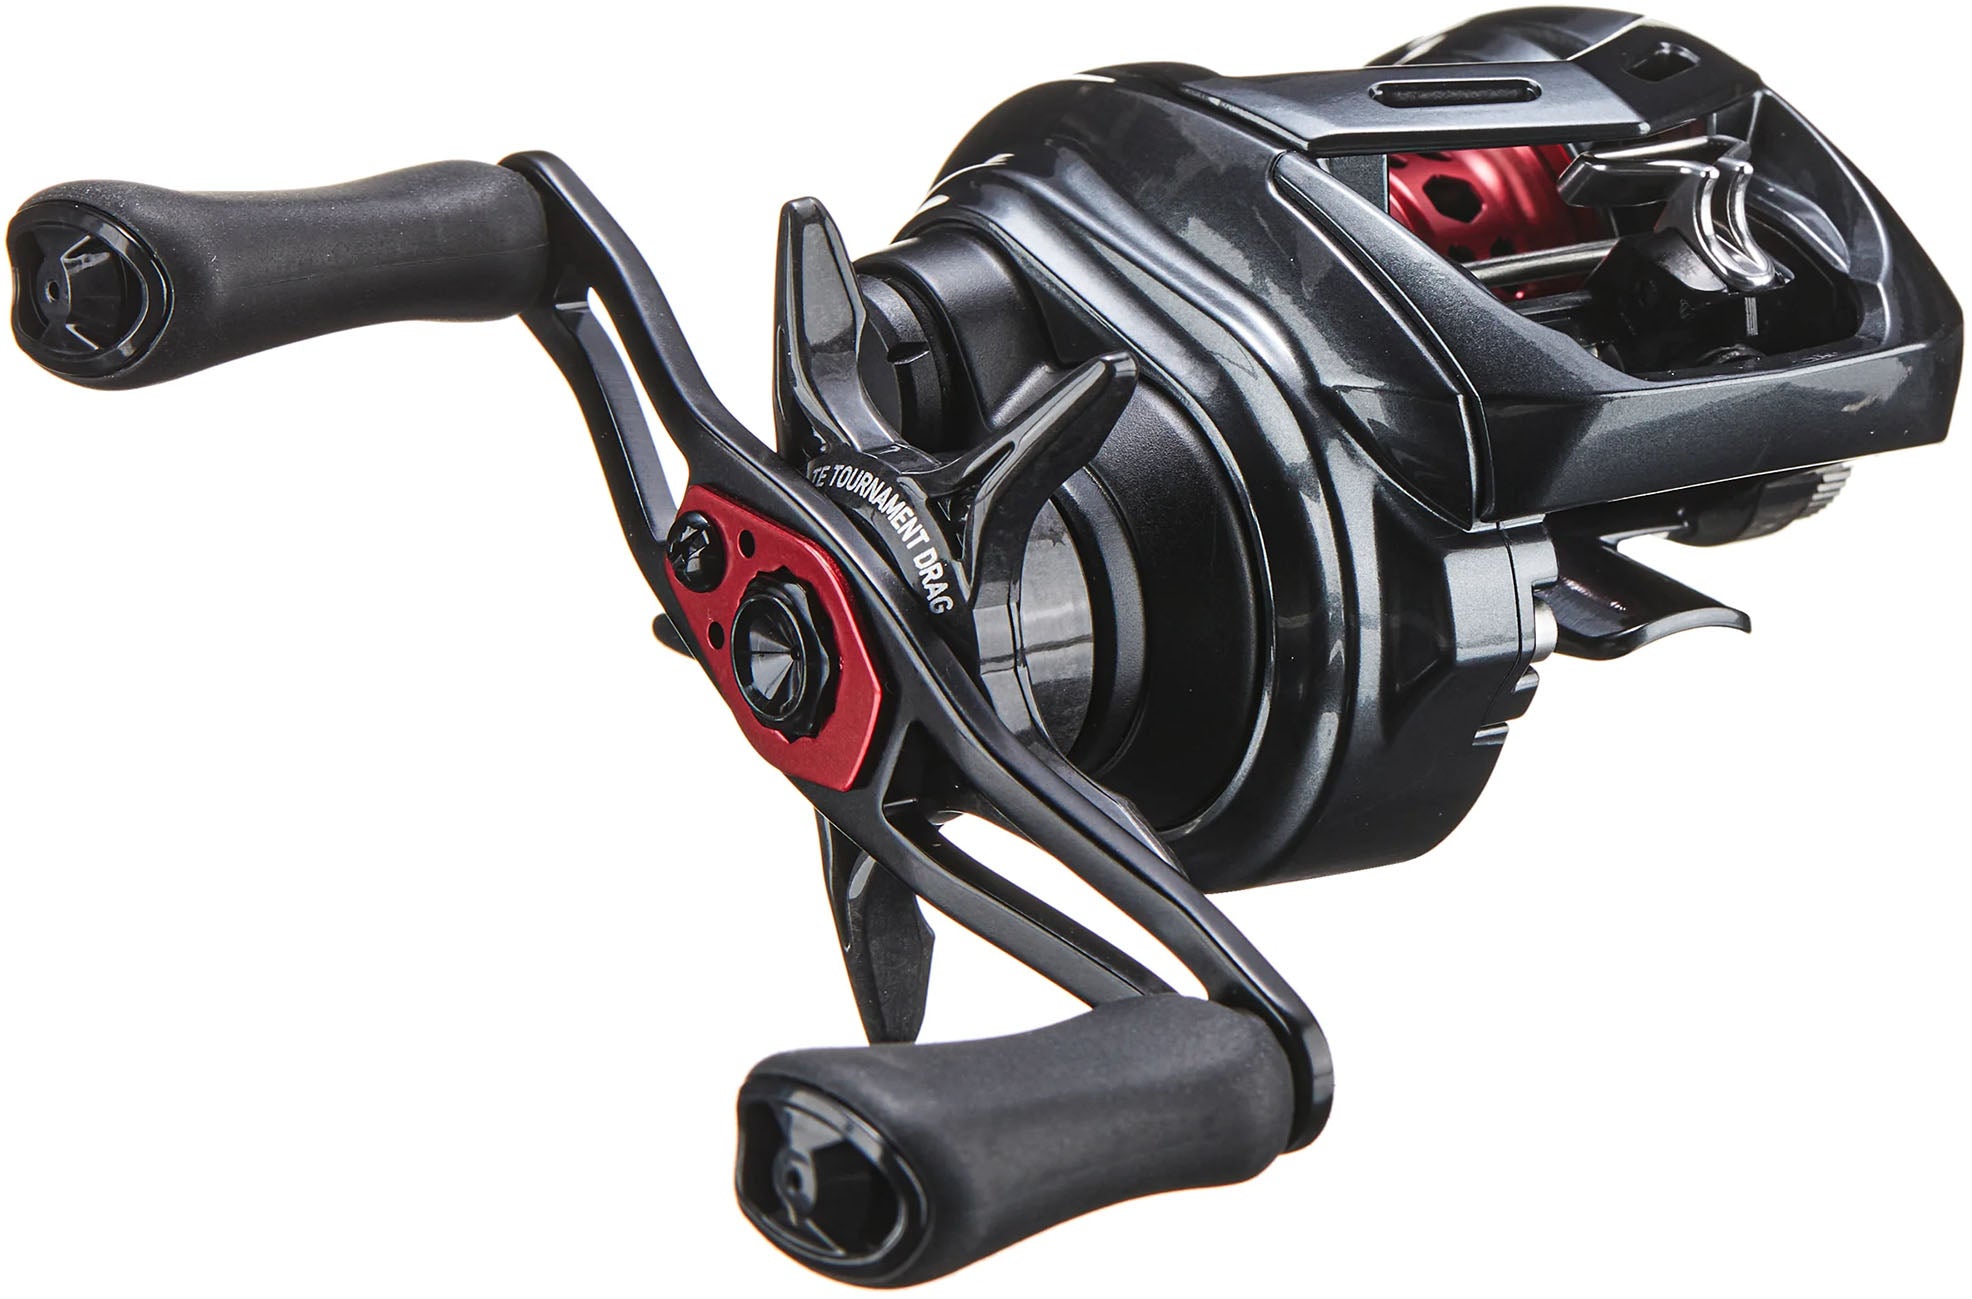 👀 some new Baitfinesse 🔥 from @daiwausa - the PX BF 70 (aka the Pixy BFS)!  The PX is the newest BFS reel release from Daiwa, takin